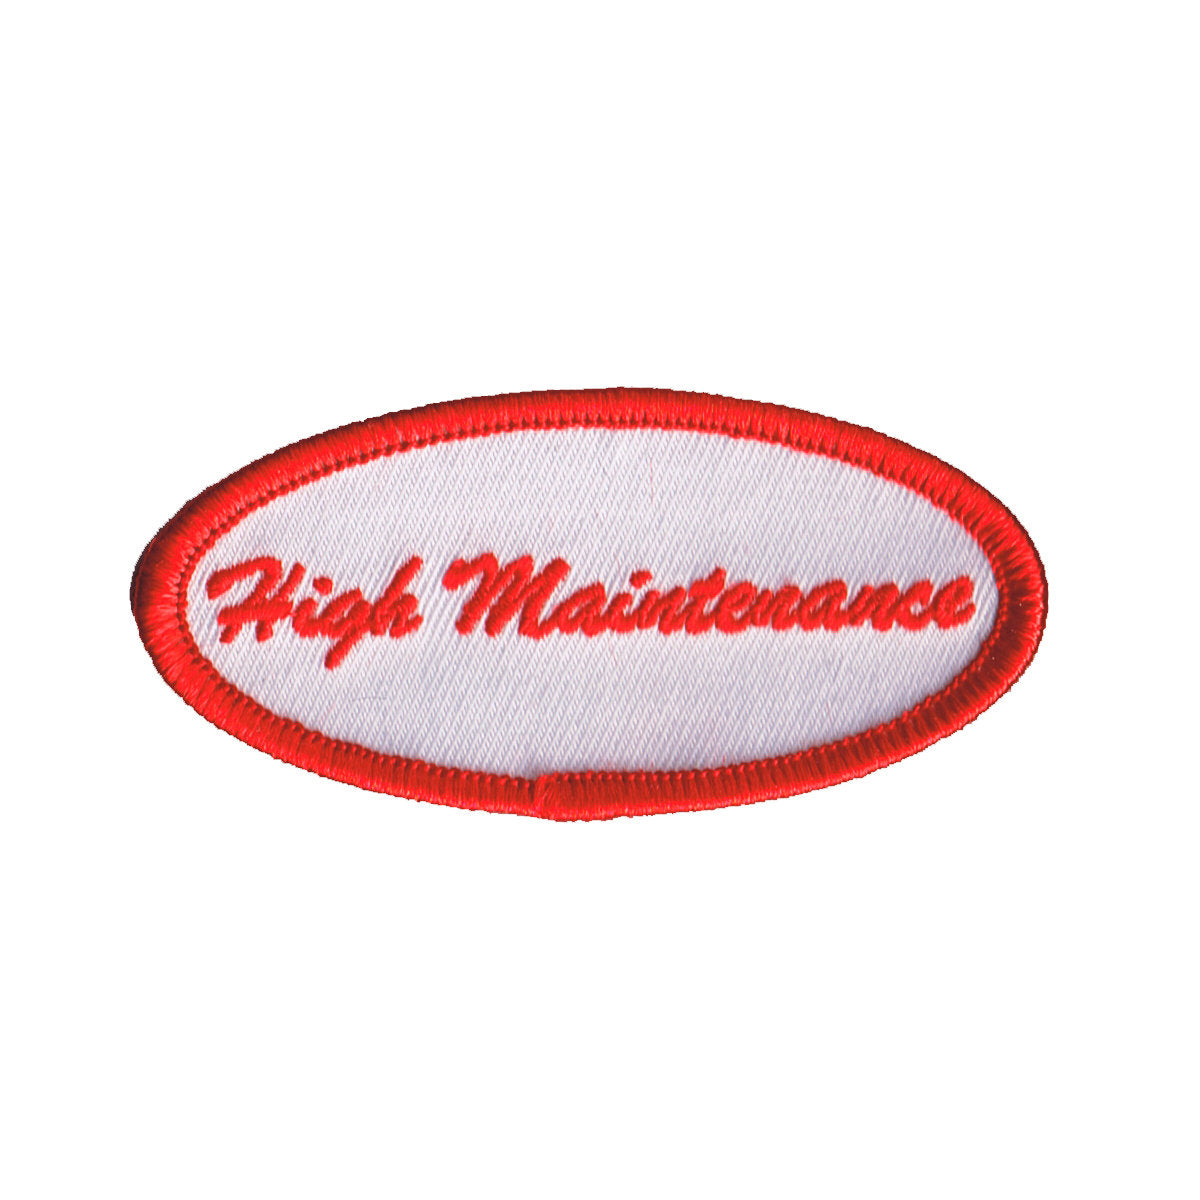 Embroidered Name Patches Work Shirts